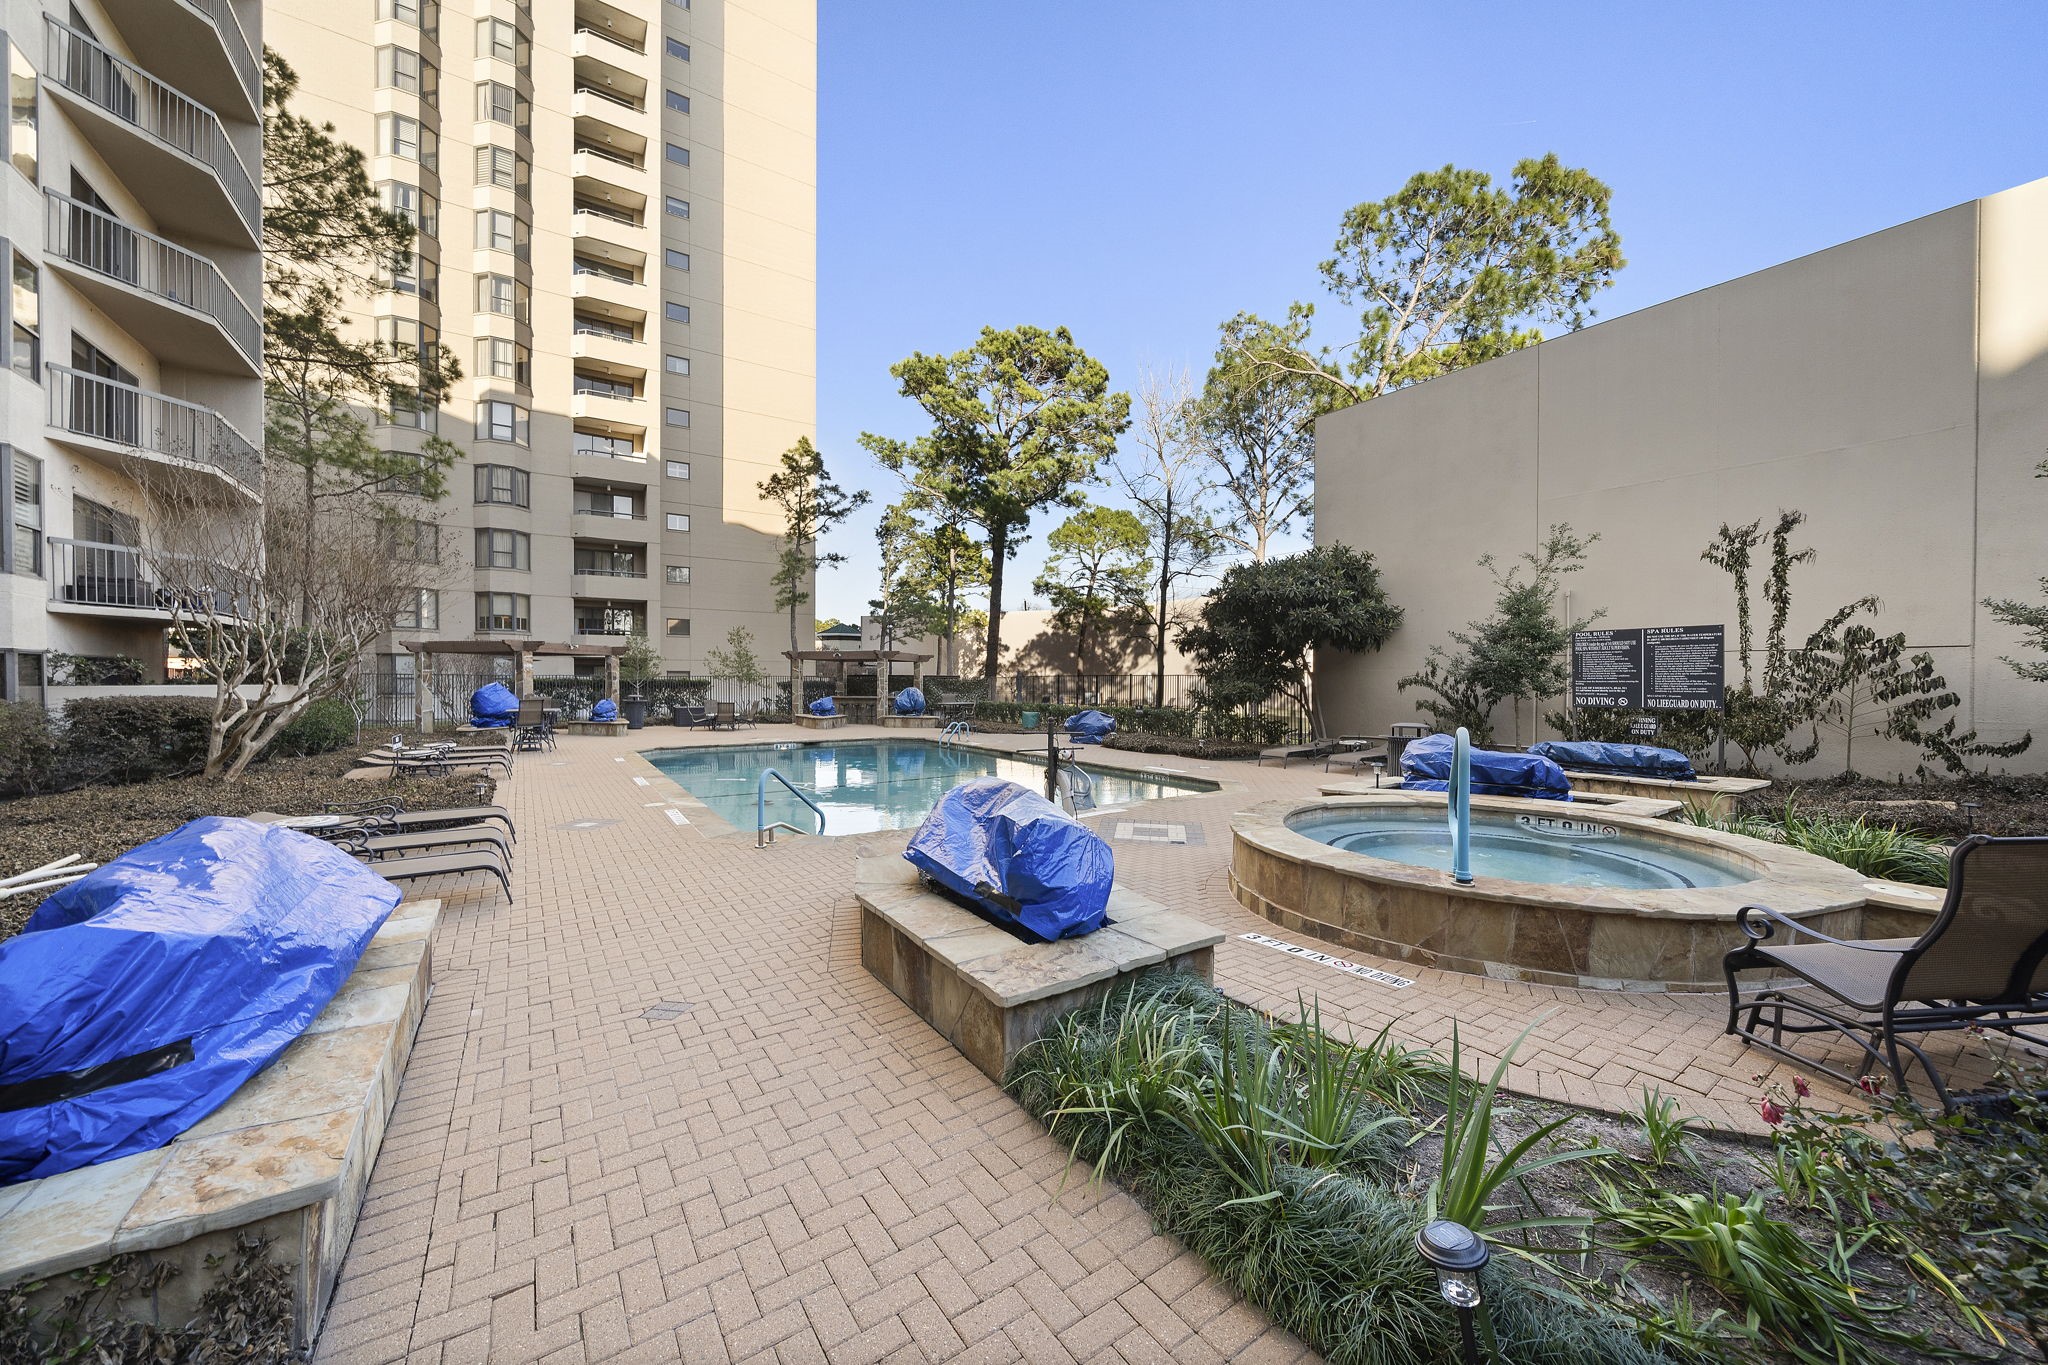 Outdoor pool area with a hot tub, lounge chairs, and a high-rise building in the background.